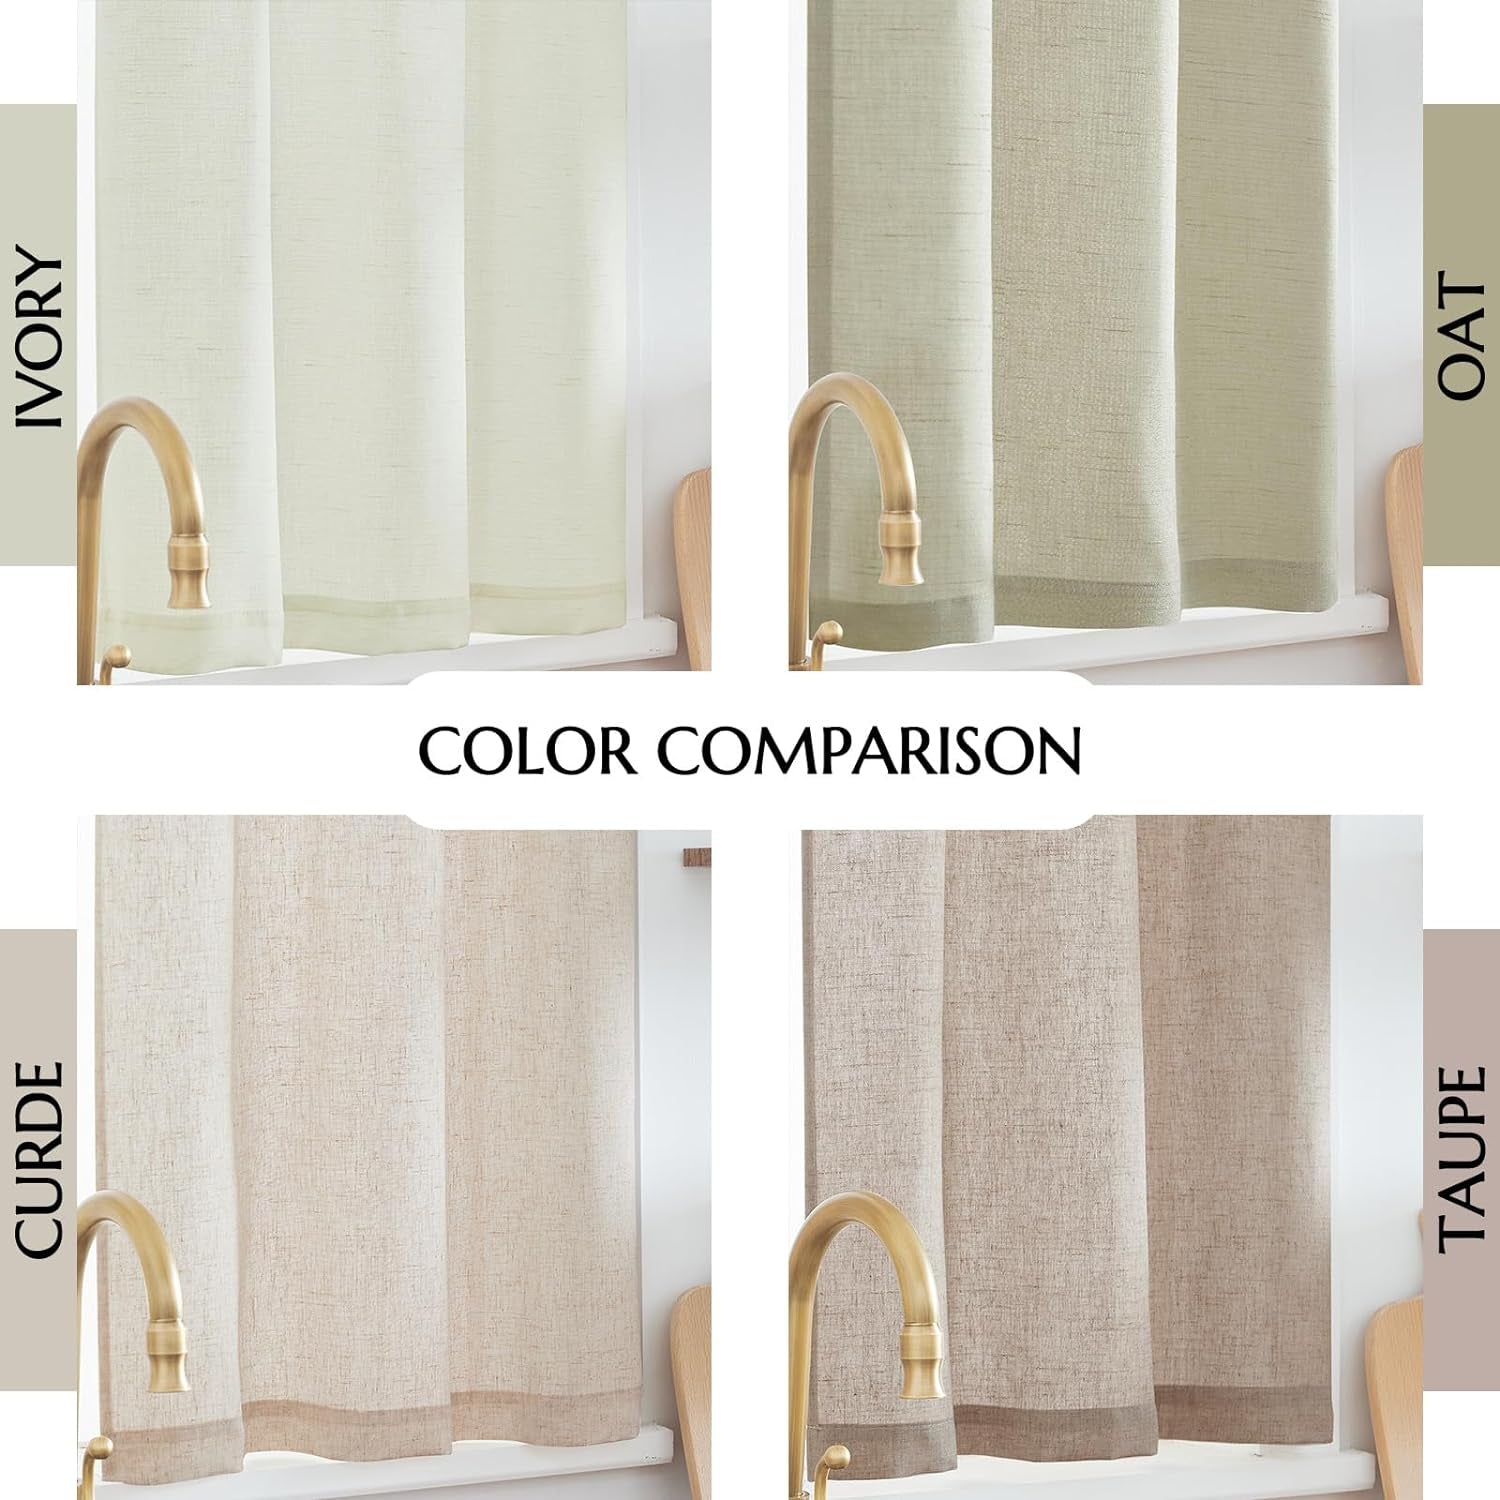 Jinchan Beige Kitchen Curtains Linen Tier Curtains 24 Inch Farmhouse Cafe Curtains Light Filtering Small Window Curtains Flax Country Rustic Rod Pocket Bathroom Laundry Room RV 2 Panels Crude  CKNY HOME FASHION   